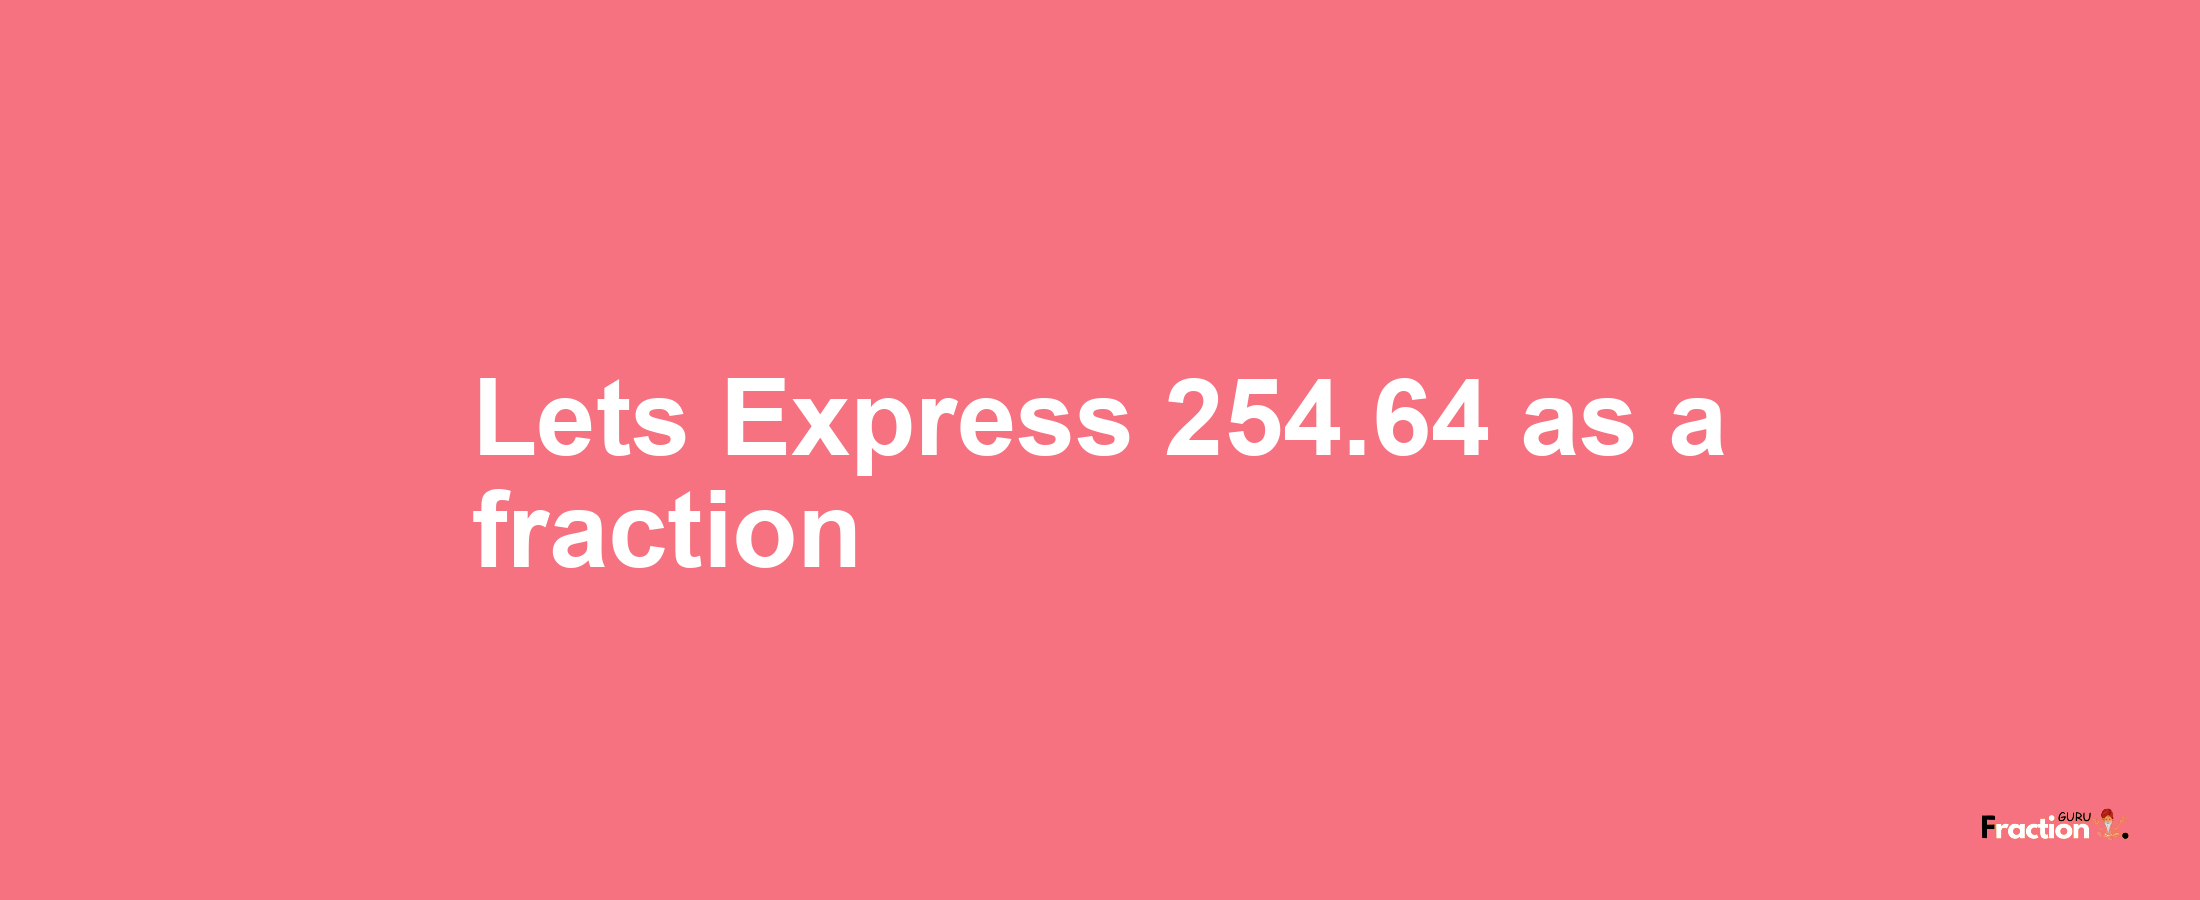 Lets Express 254.64 as afraction